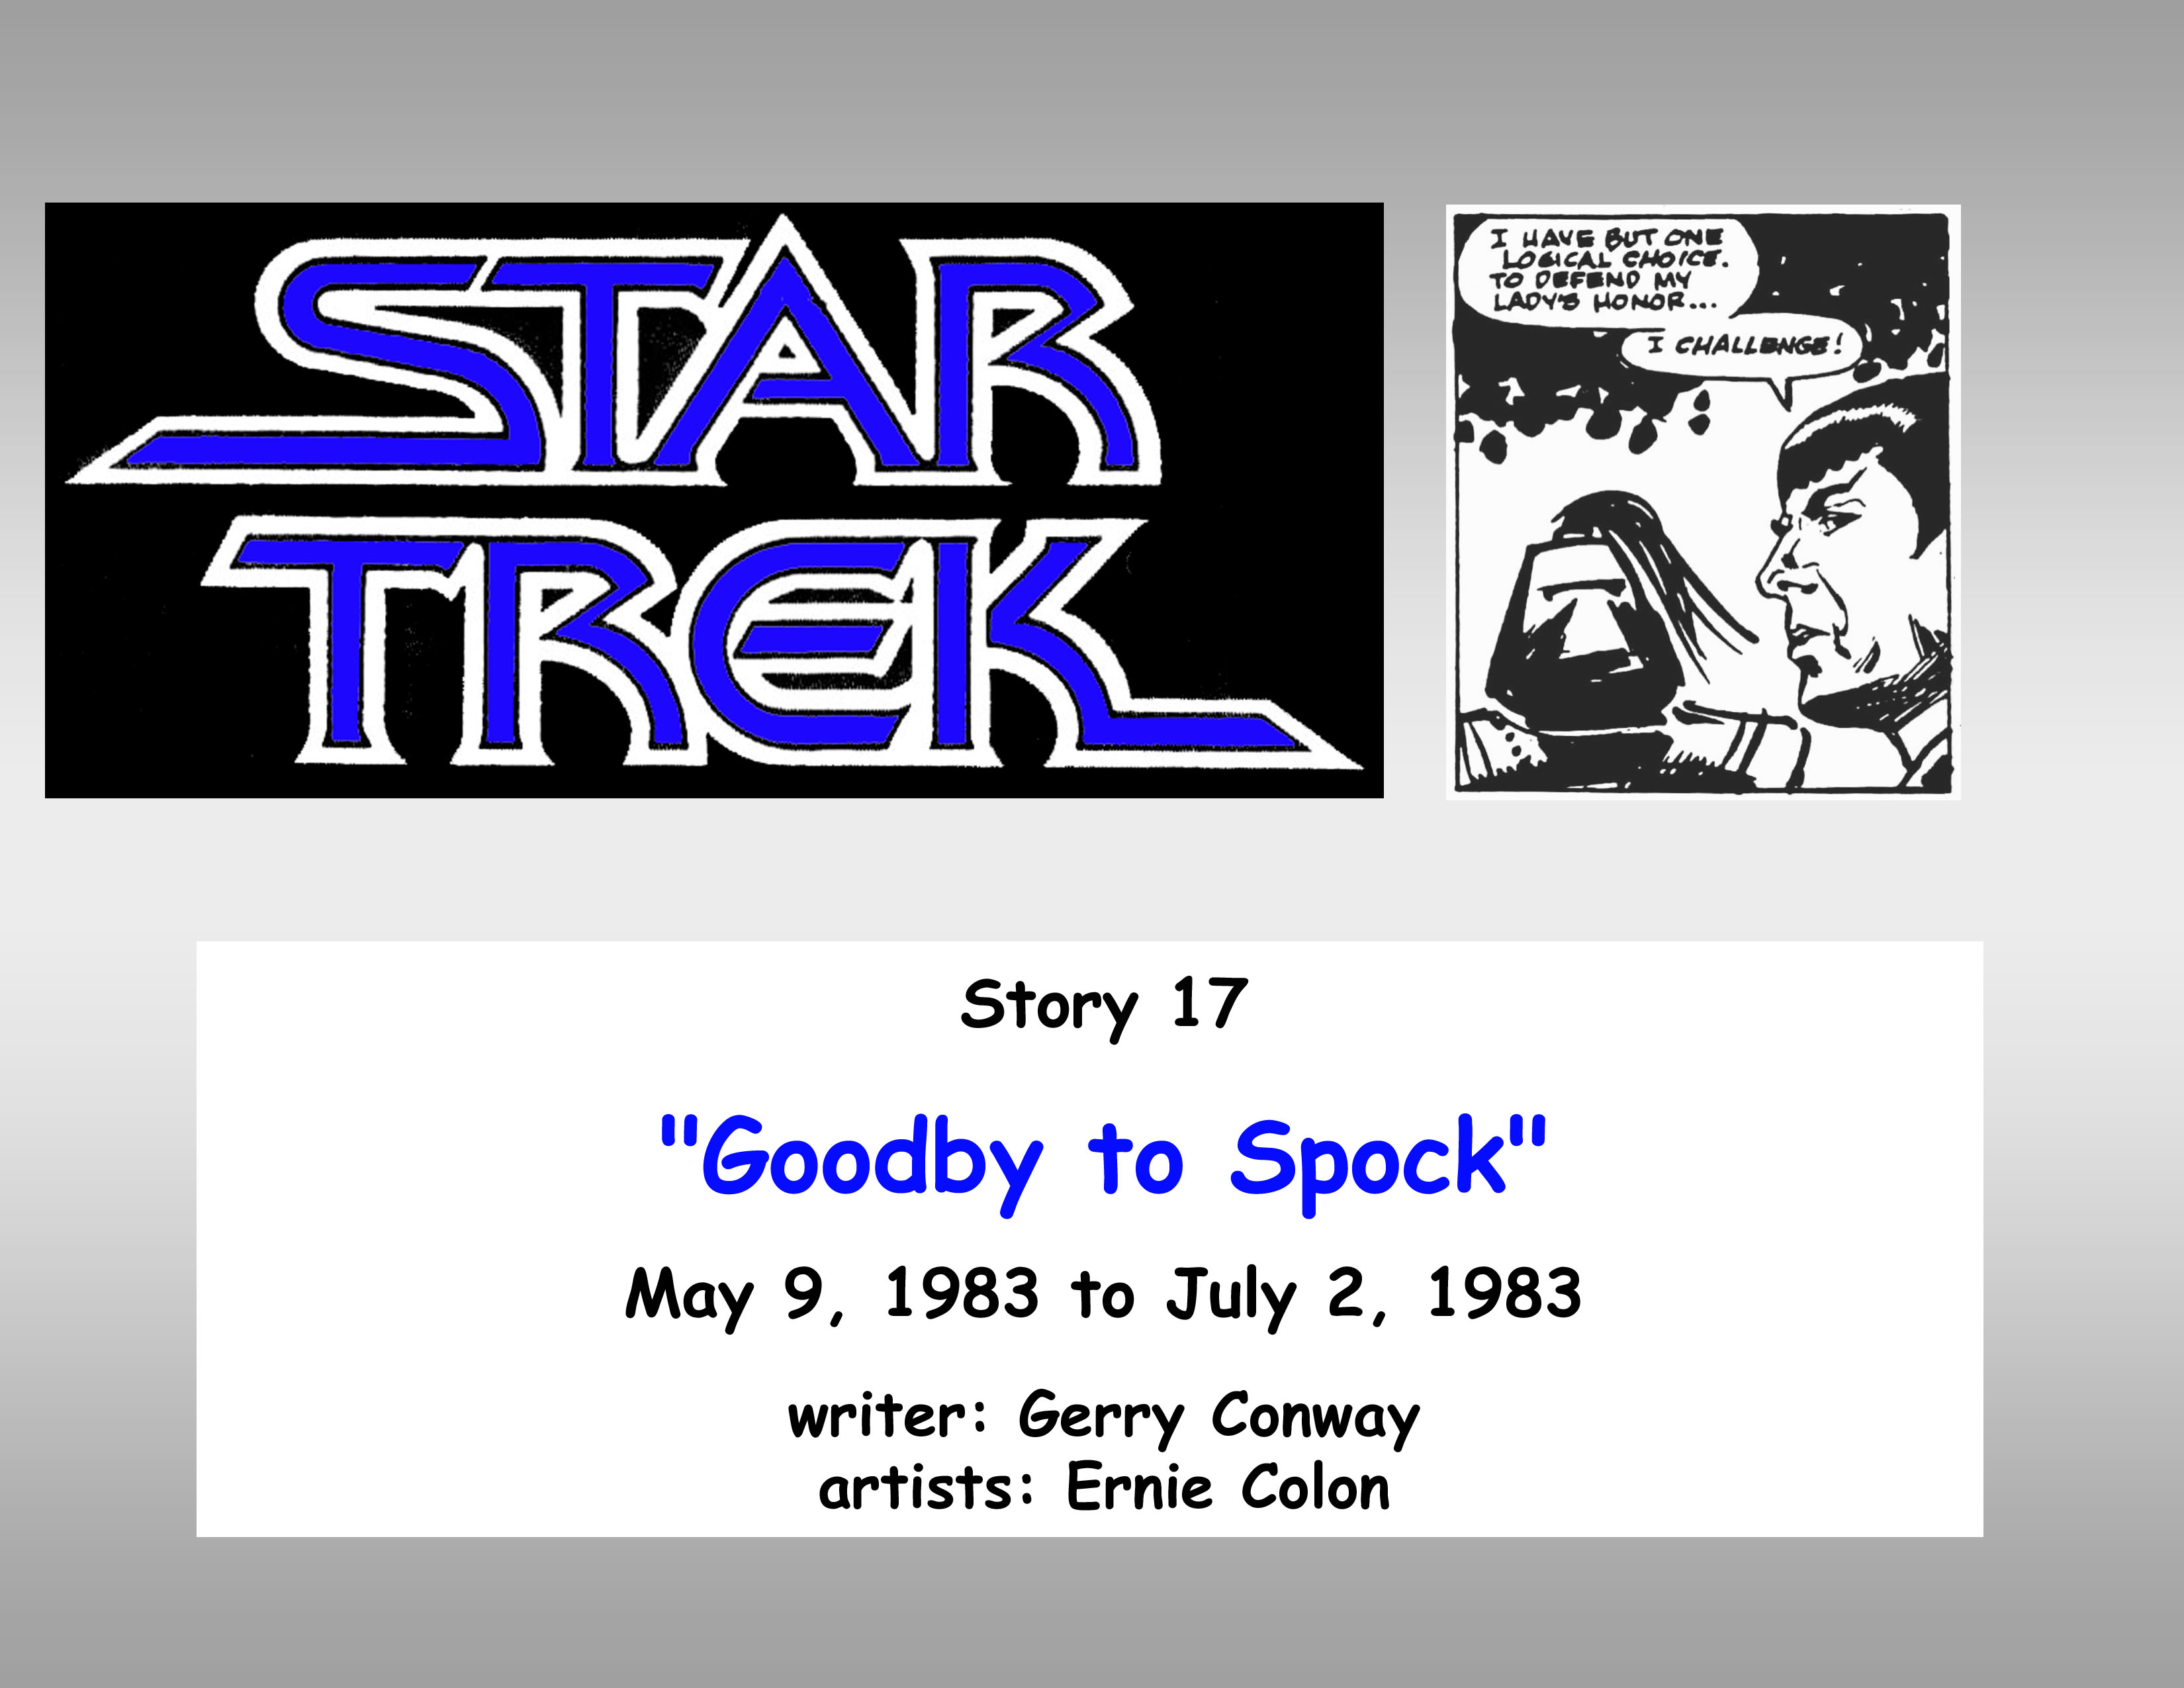 Goodby to Spock.